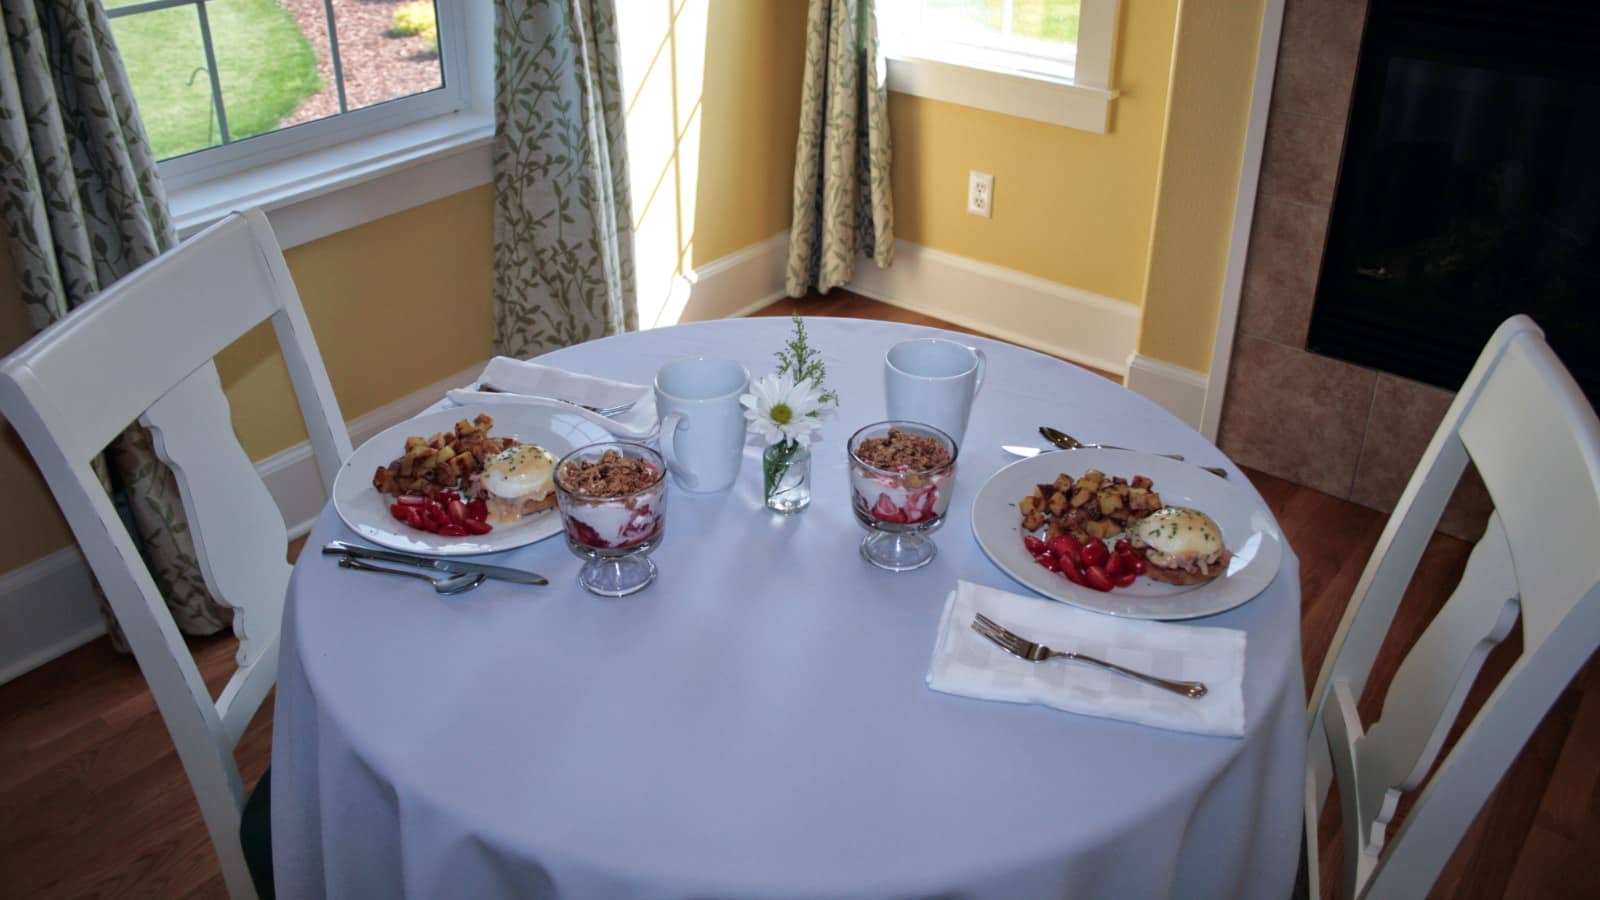 Round table with white tablecloth, two place settings each with a breakfast dish and fruit parfait